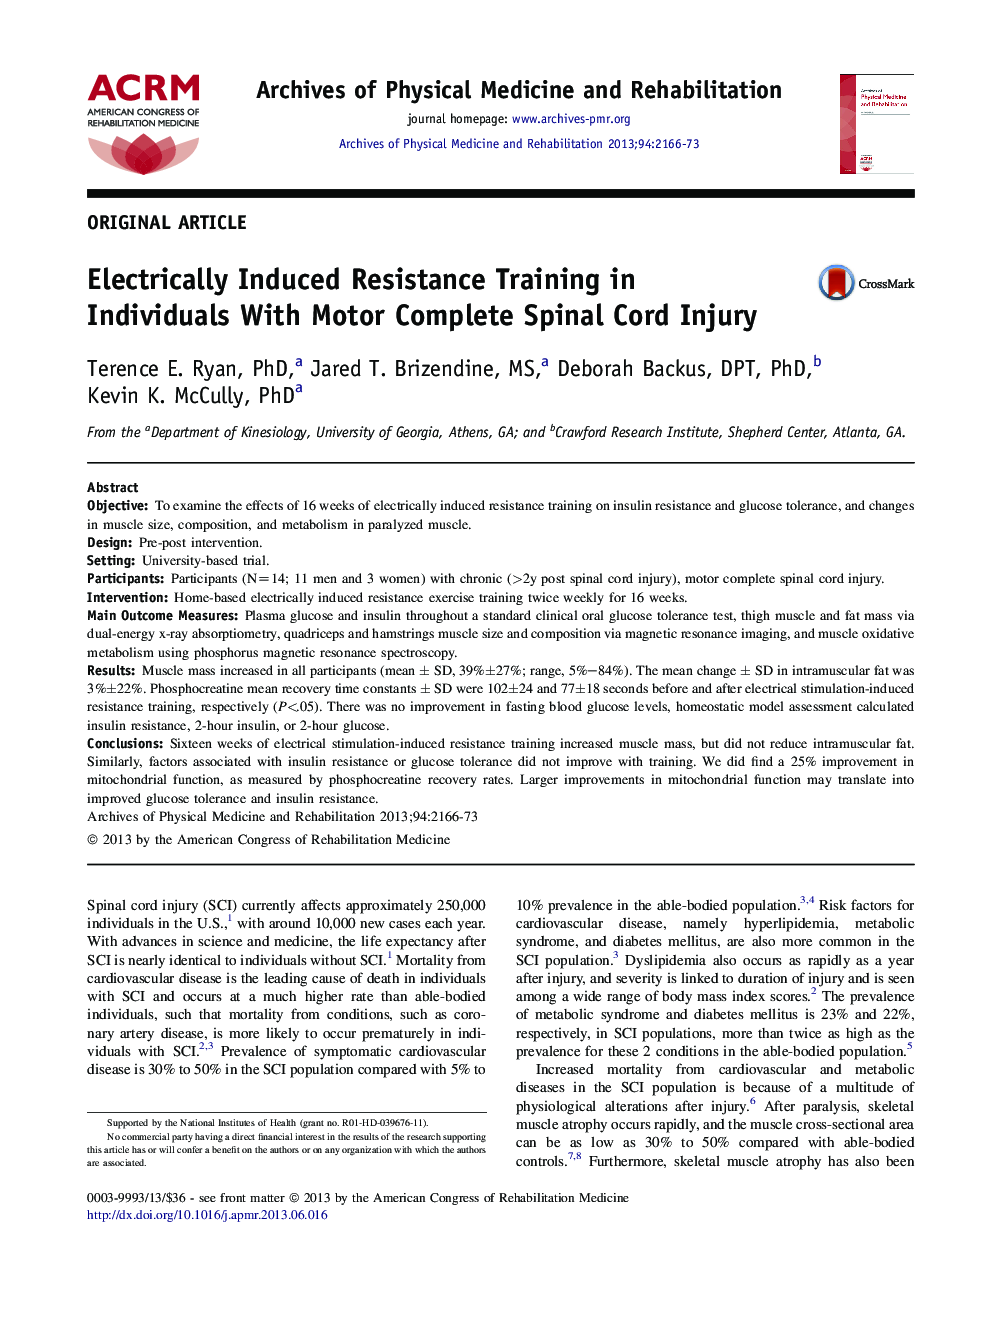 Electrically Induced Resistance Training in Individuals With Motor Complete Spinal Cord Injury